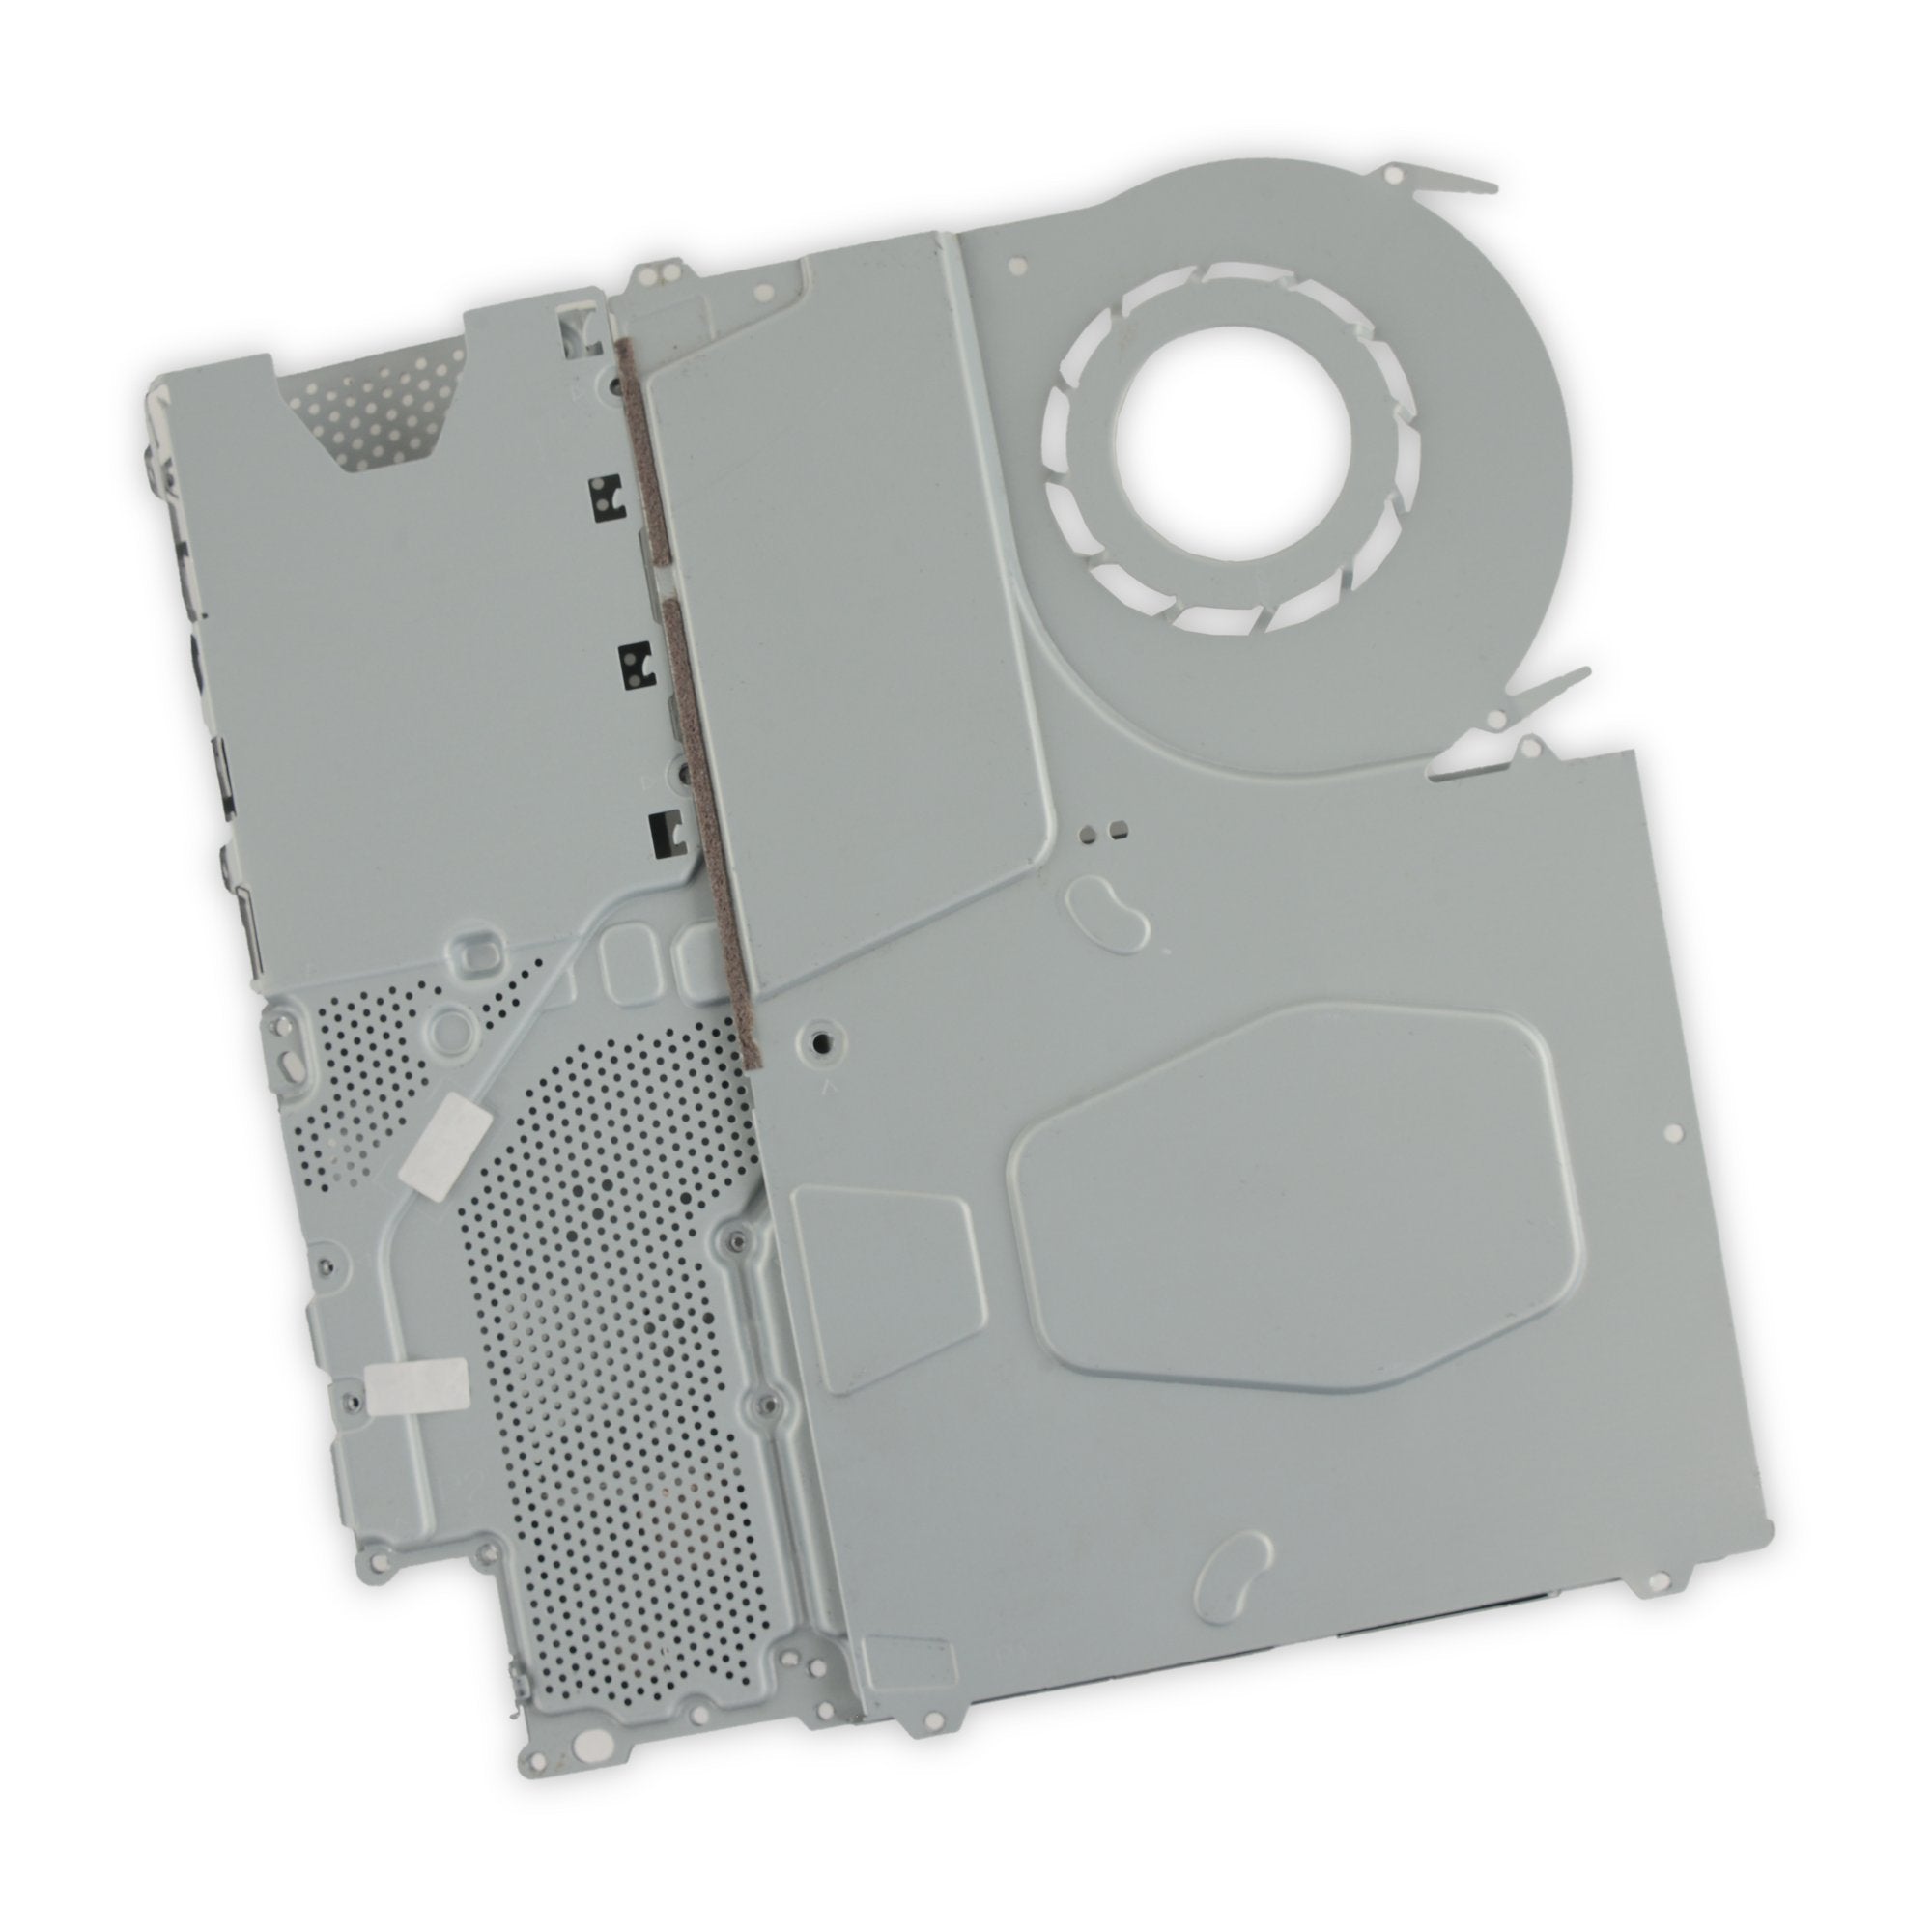 PlayStation Slim Sink and Chassis Plates